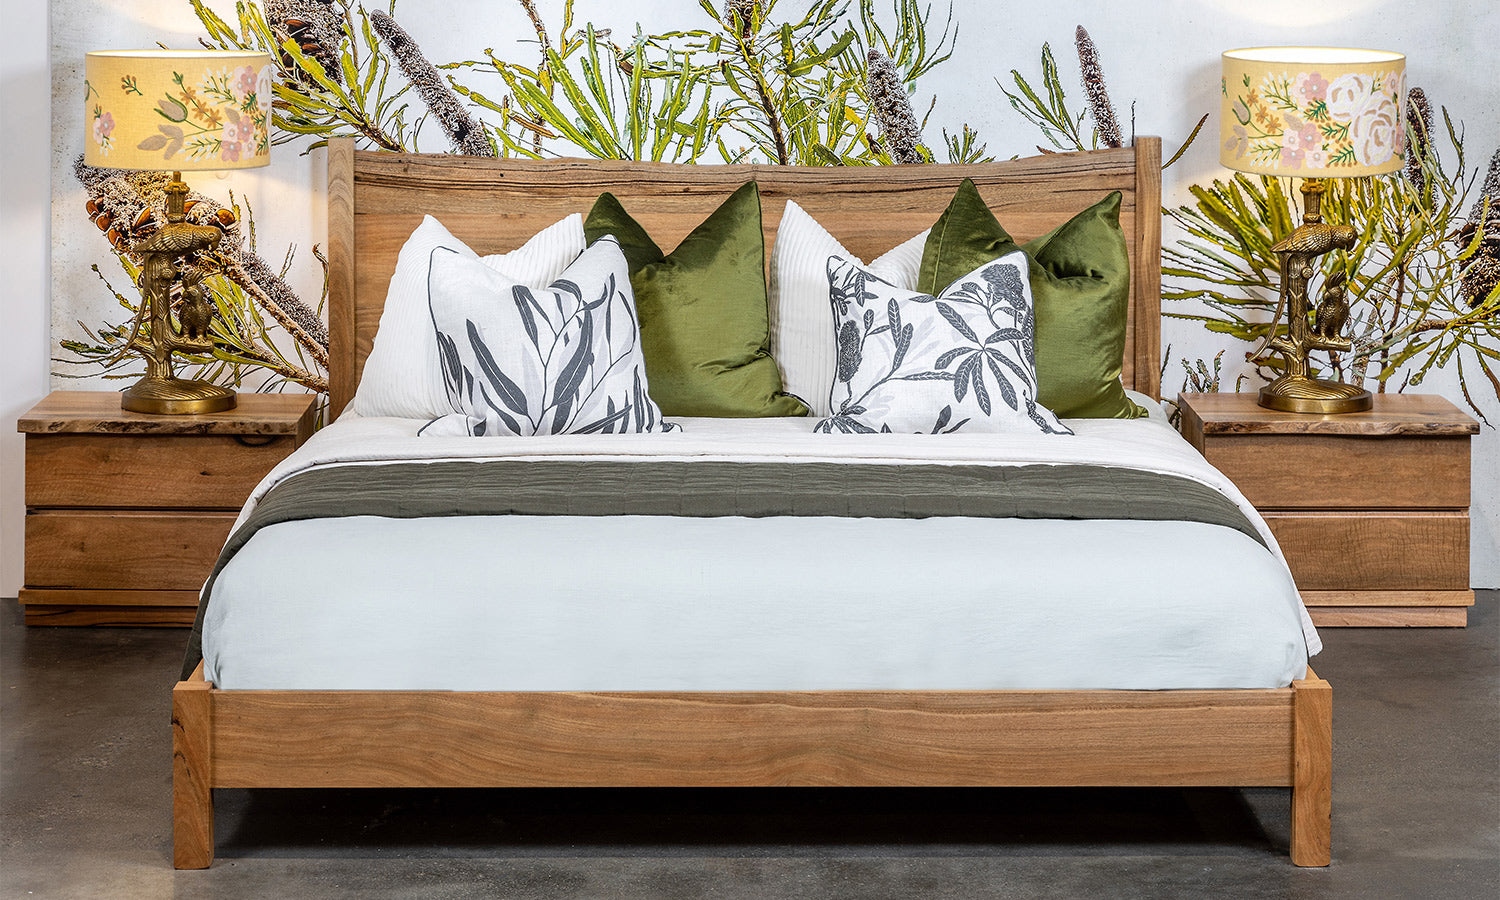 Naturaliste Natural Edge Solid Marri Timber Wood Queen or King Bed and Bedroom Suite Made in Perth WA